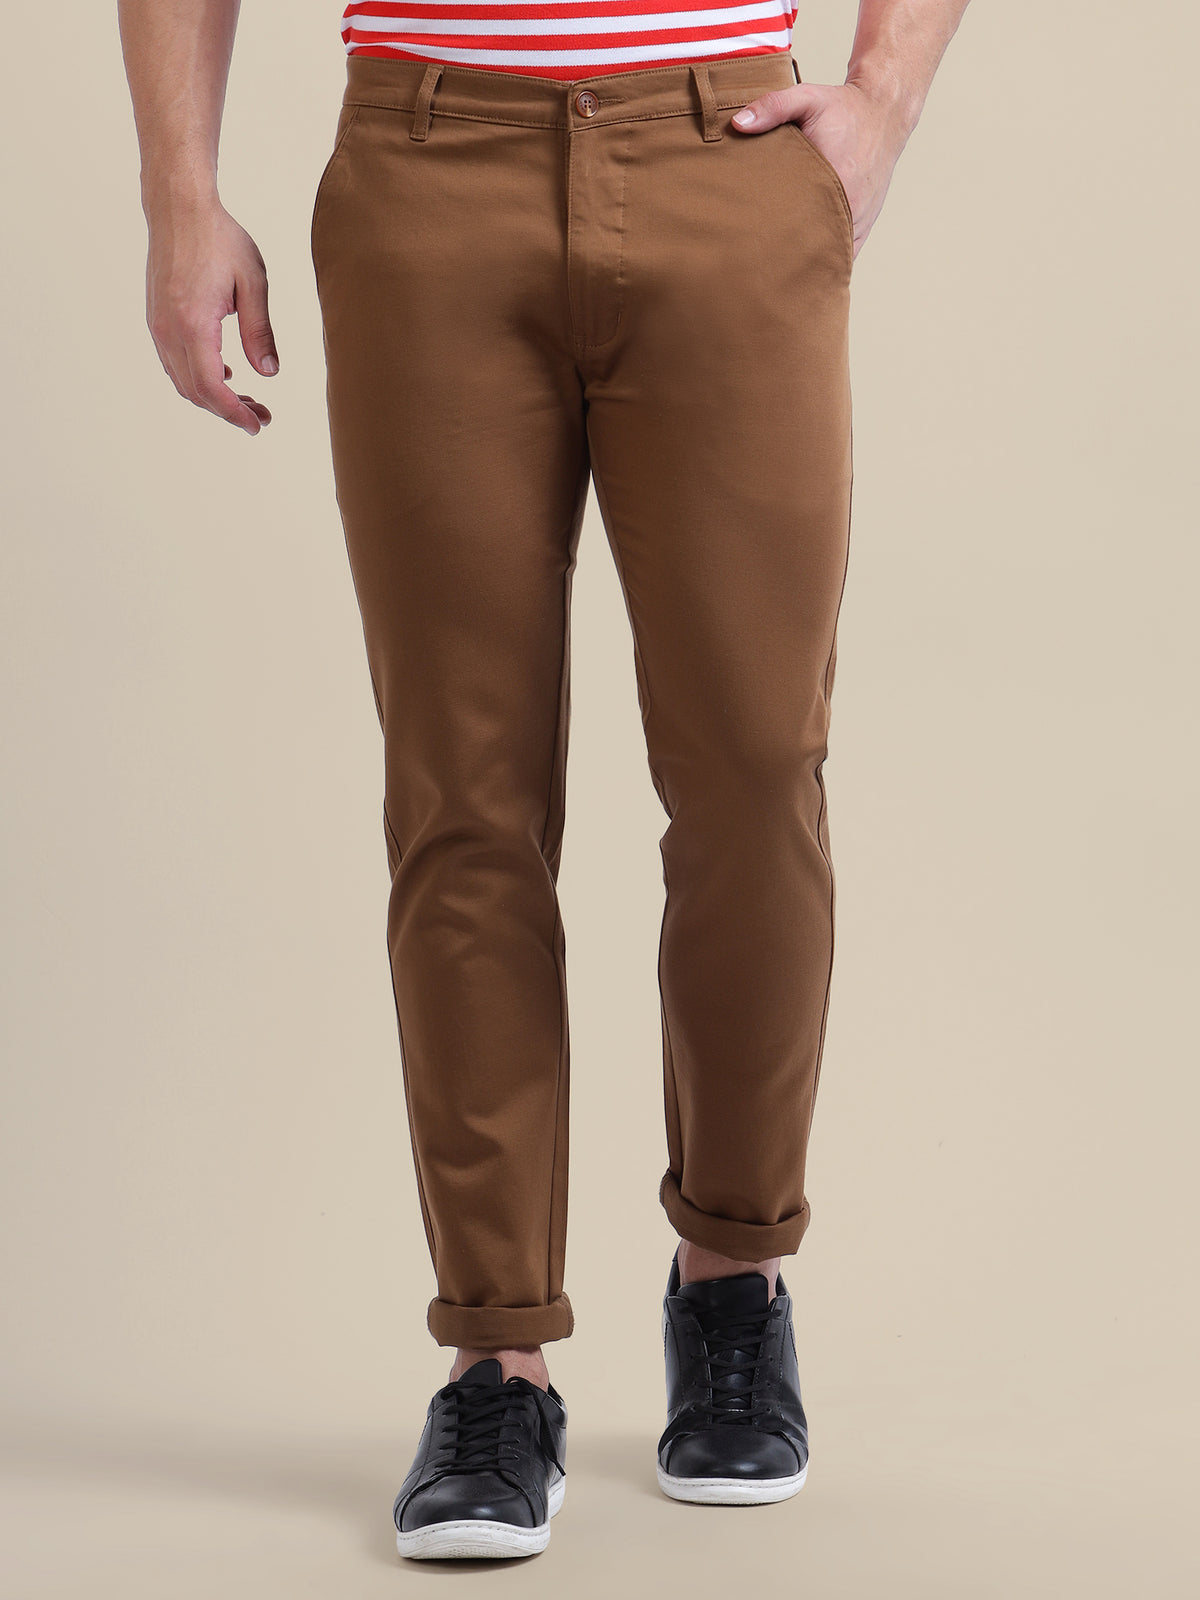 AMSWAN  MEN'S BROWN CASUAL TROUSERS - SOLID COTTON LYCRA, SMART FIT